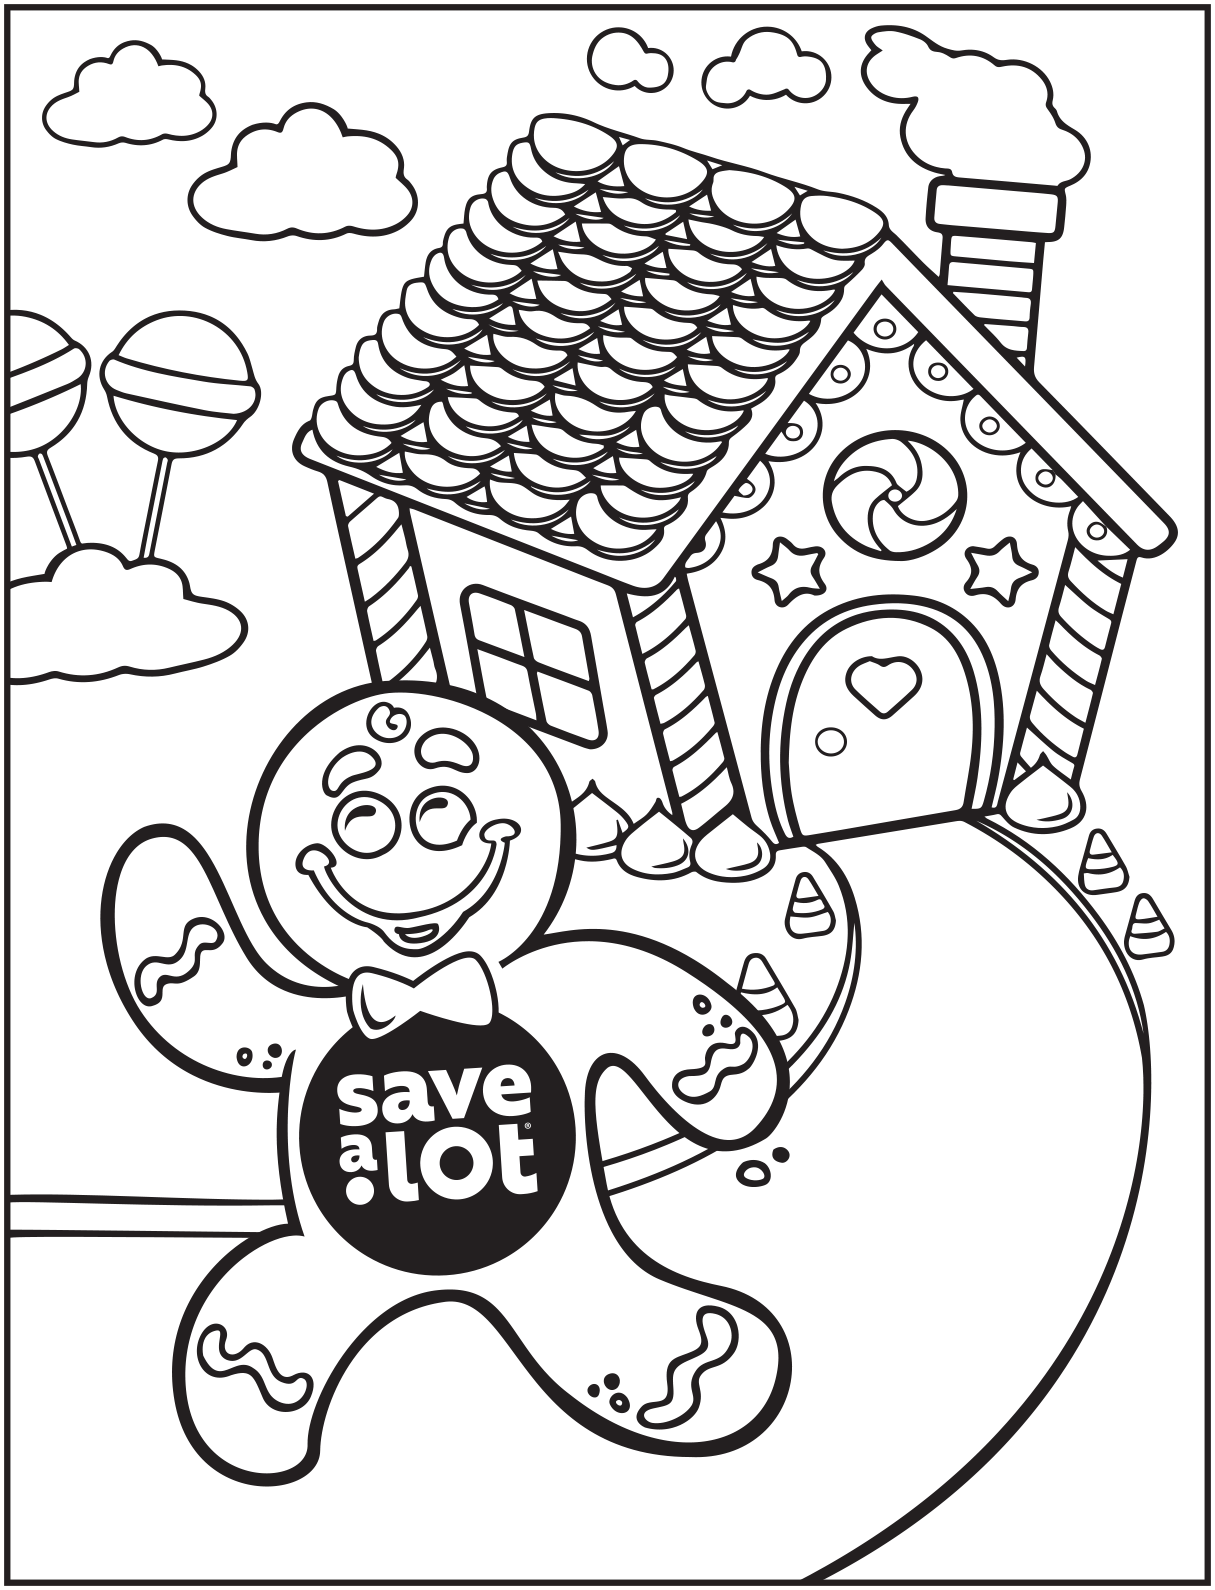 Archive Holiday Coloring Sheets - Save ...